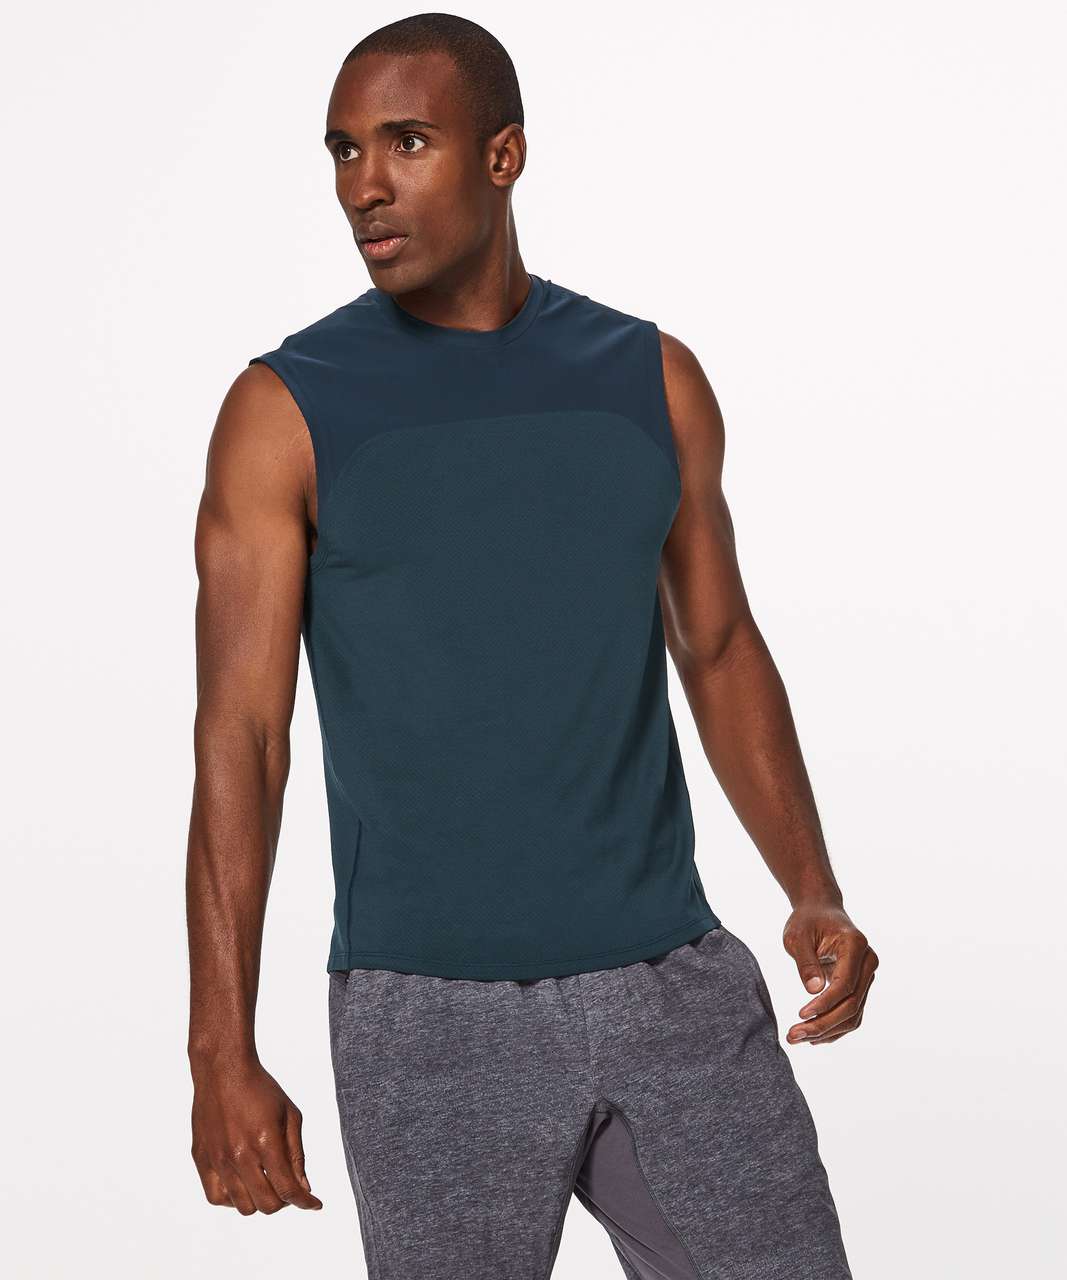 Lululemon License To Train Sleeveless - Nocturnal Teal